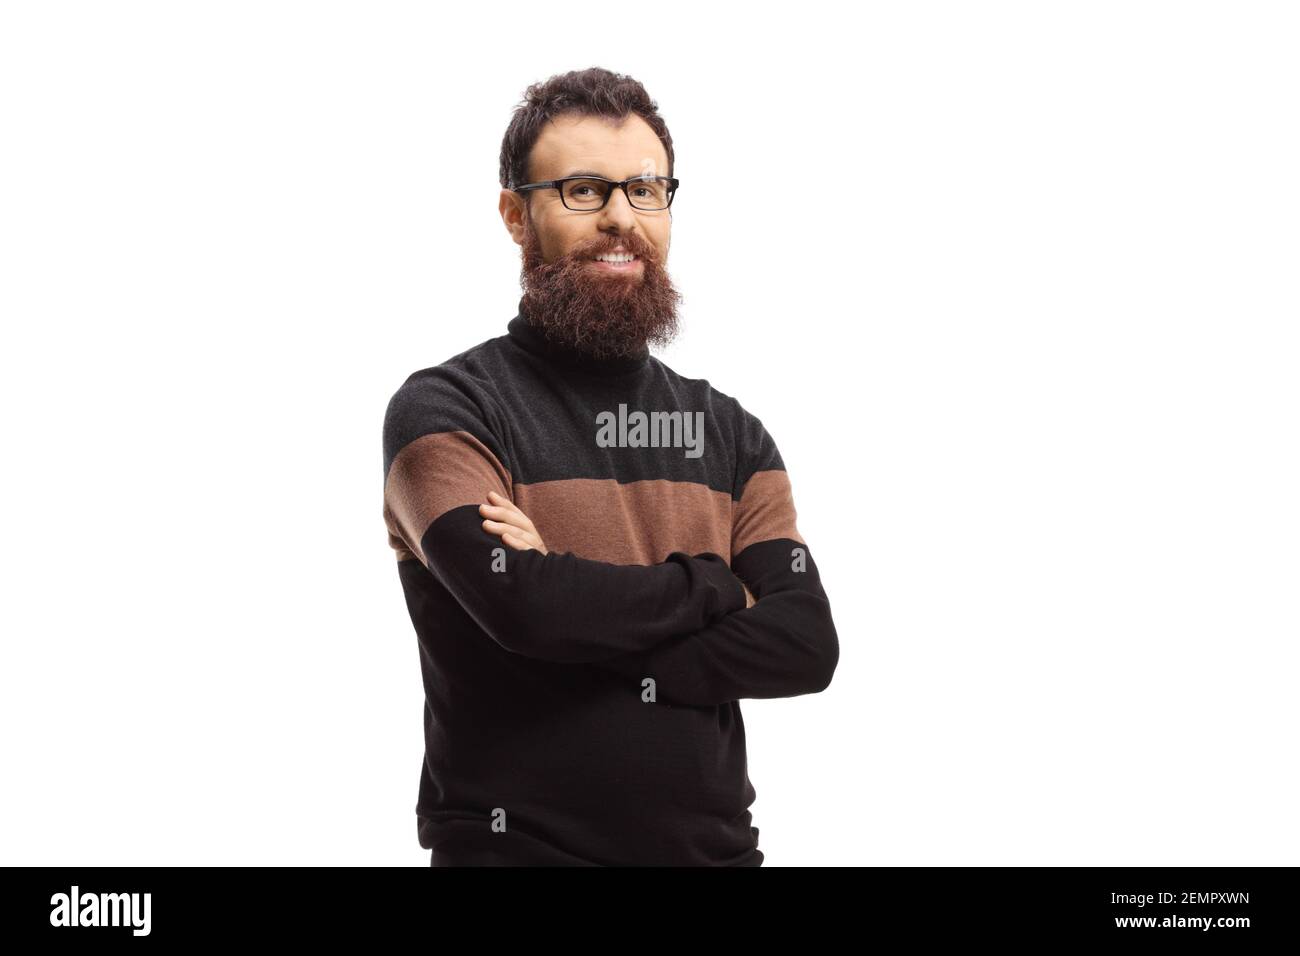 Bearded man wearing a turtleneck jumper isolated on white background Stock Photo